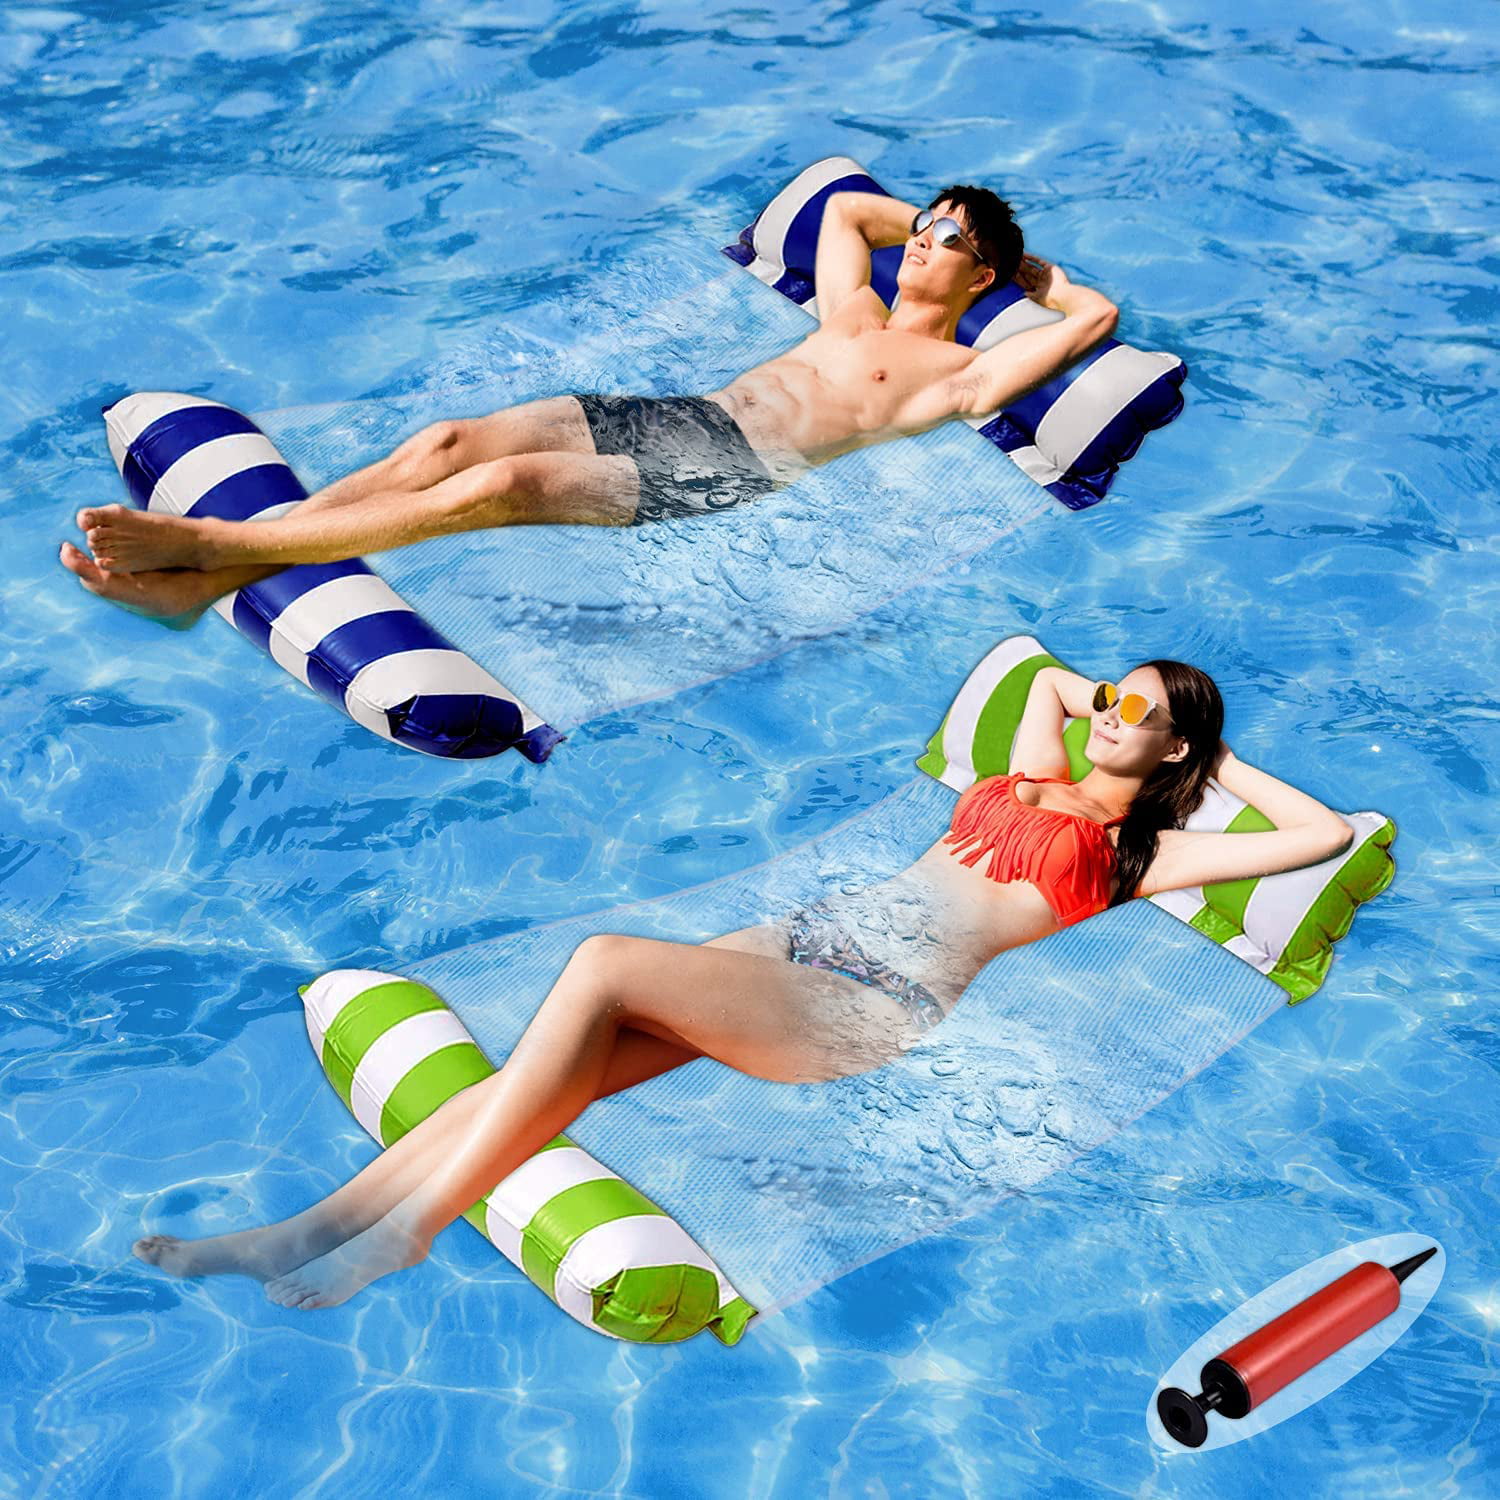 Heavy Duty Water Lake Floats No Pump Required Pool Rafts Lounger Chair for Men Pool Float Hammock for Lack Pool Floats Adult Inflatable Swimming Pool Floats for Large People 